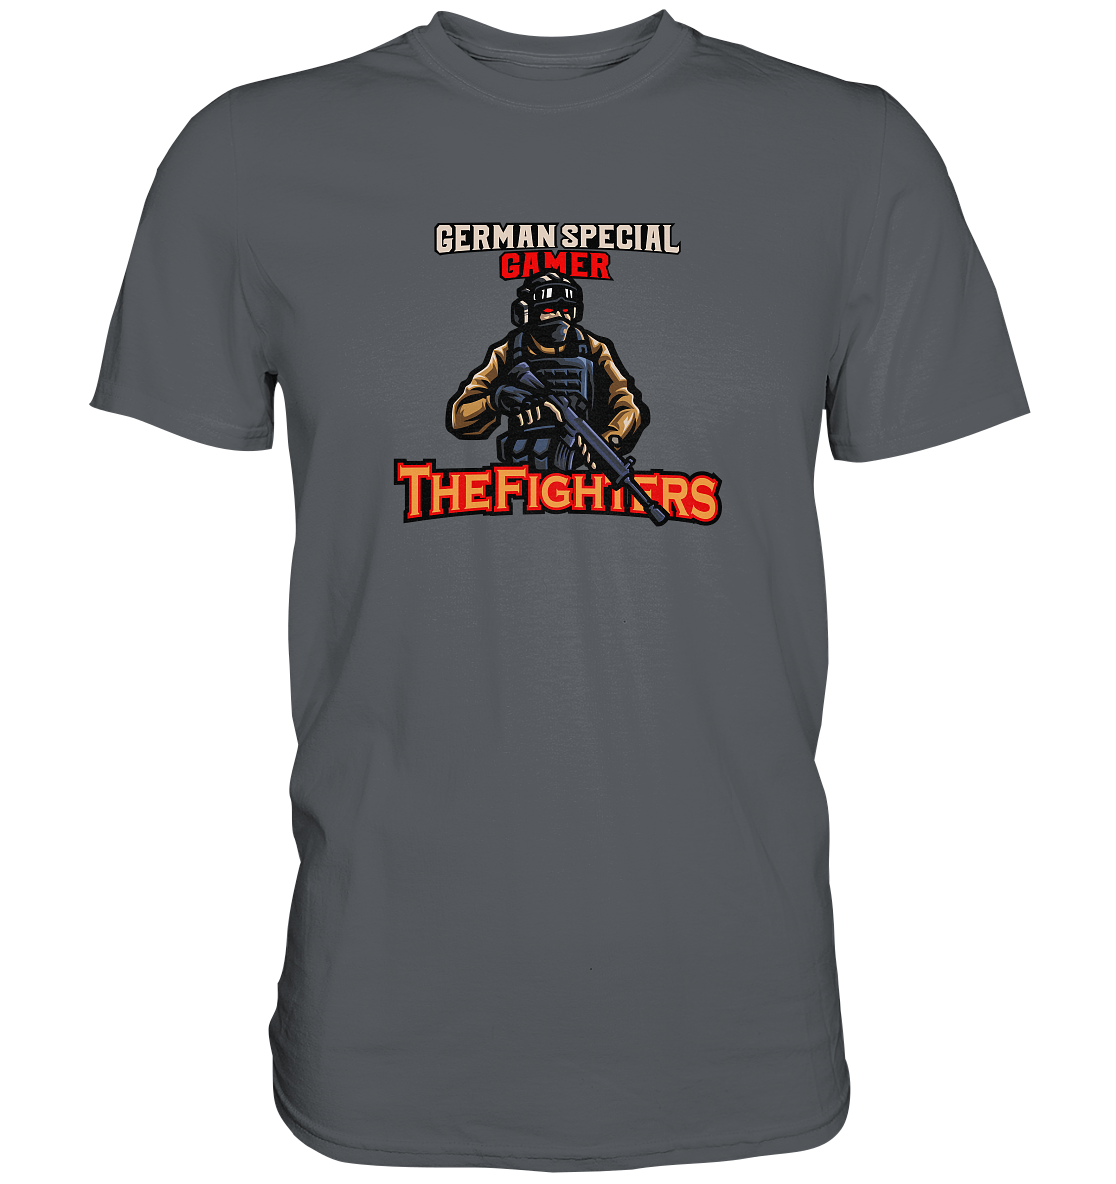 GERMAN SPECIAL GAMER - THE FIGHTERS - Basic Shirt